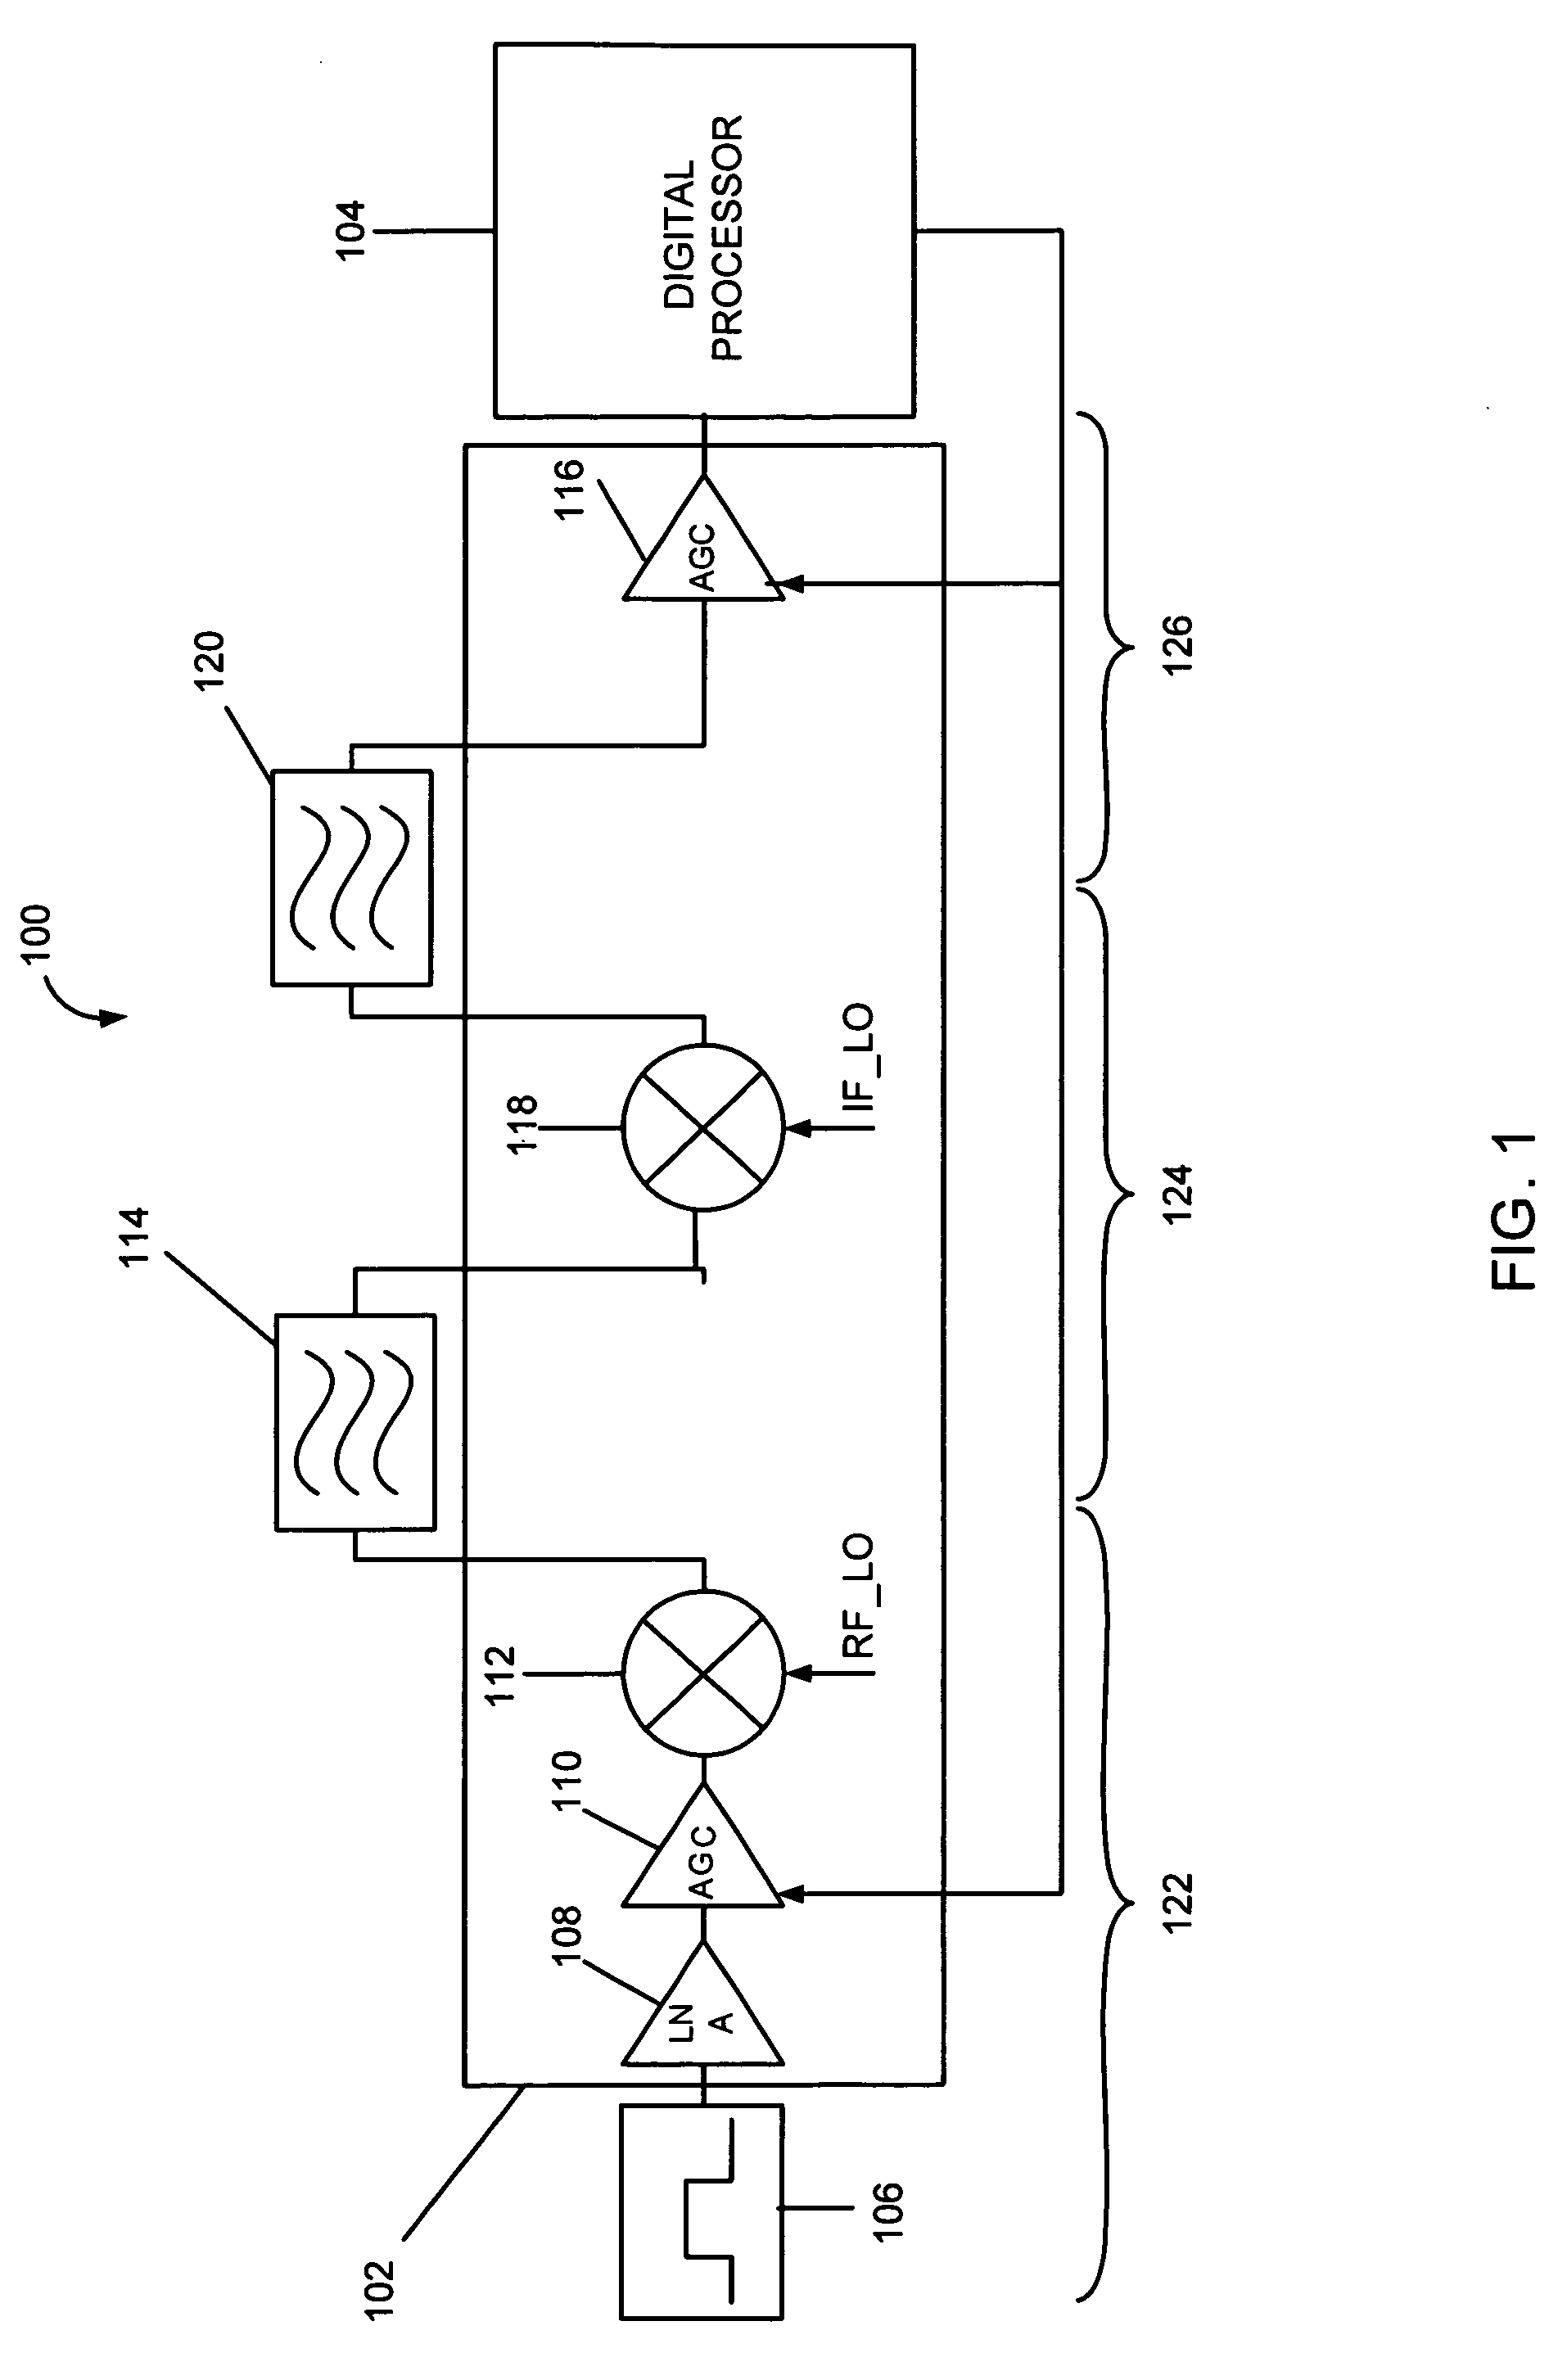 Systems and method for a highly integrated, multi-mode tuner